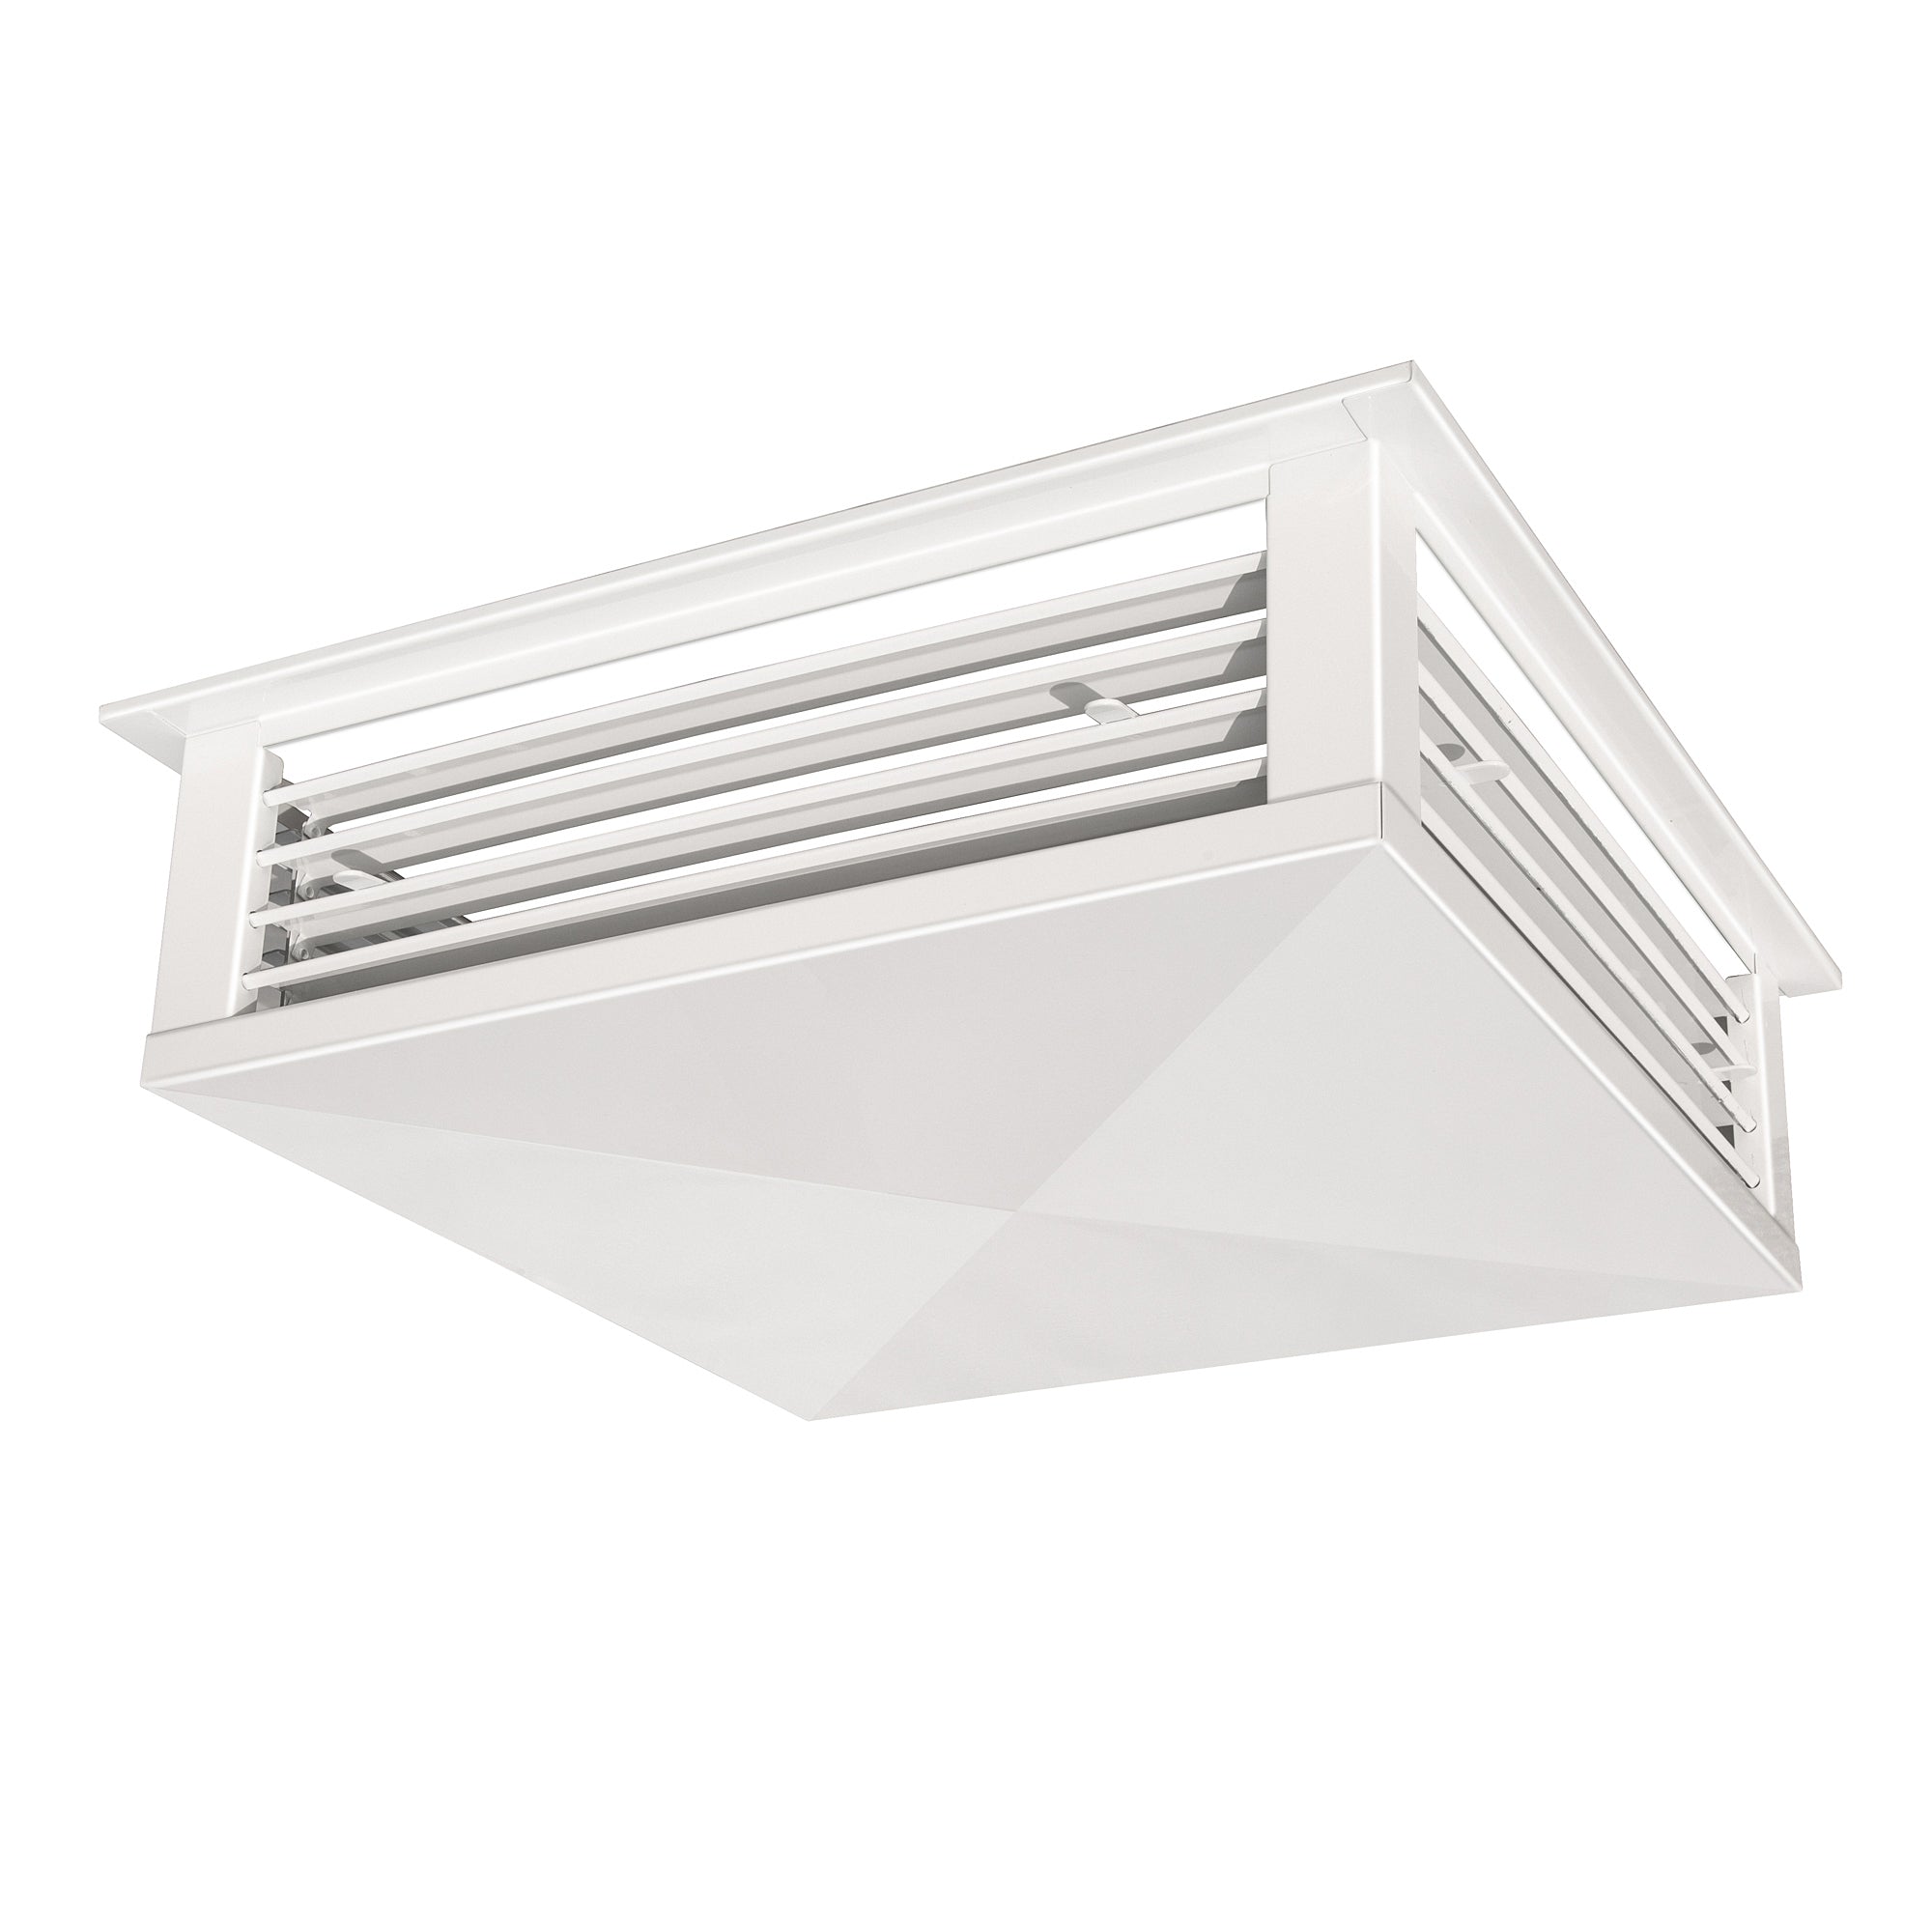 [Used] GSW21-K05-CR-DF-24P GSW 24” White Powder Coated 4-Way Adjustable Air Diffuser for Evaporative Swamp Cooler, 26” Mounting Edge (24"x24"x6")